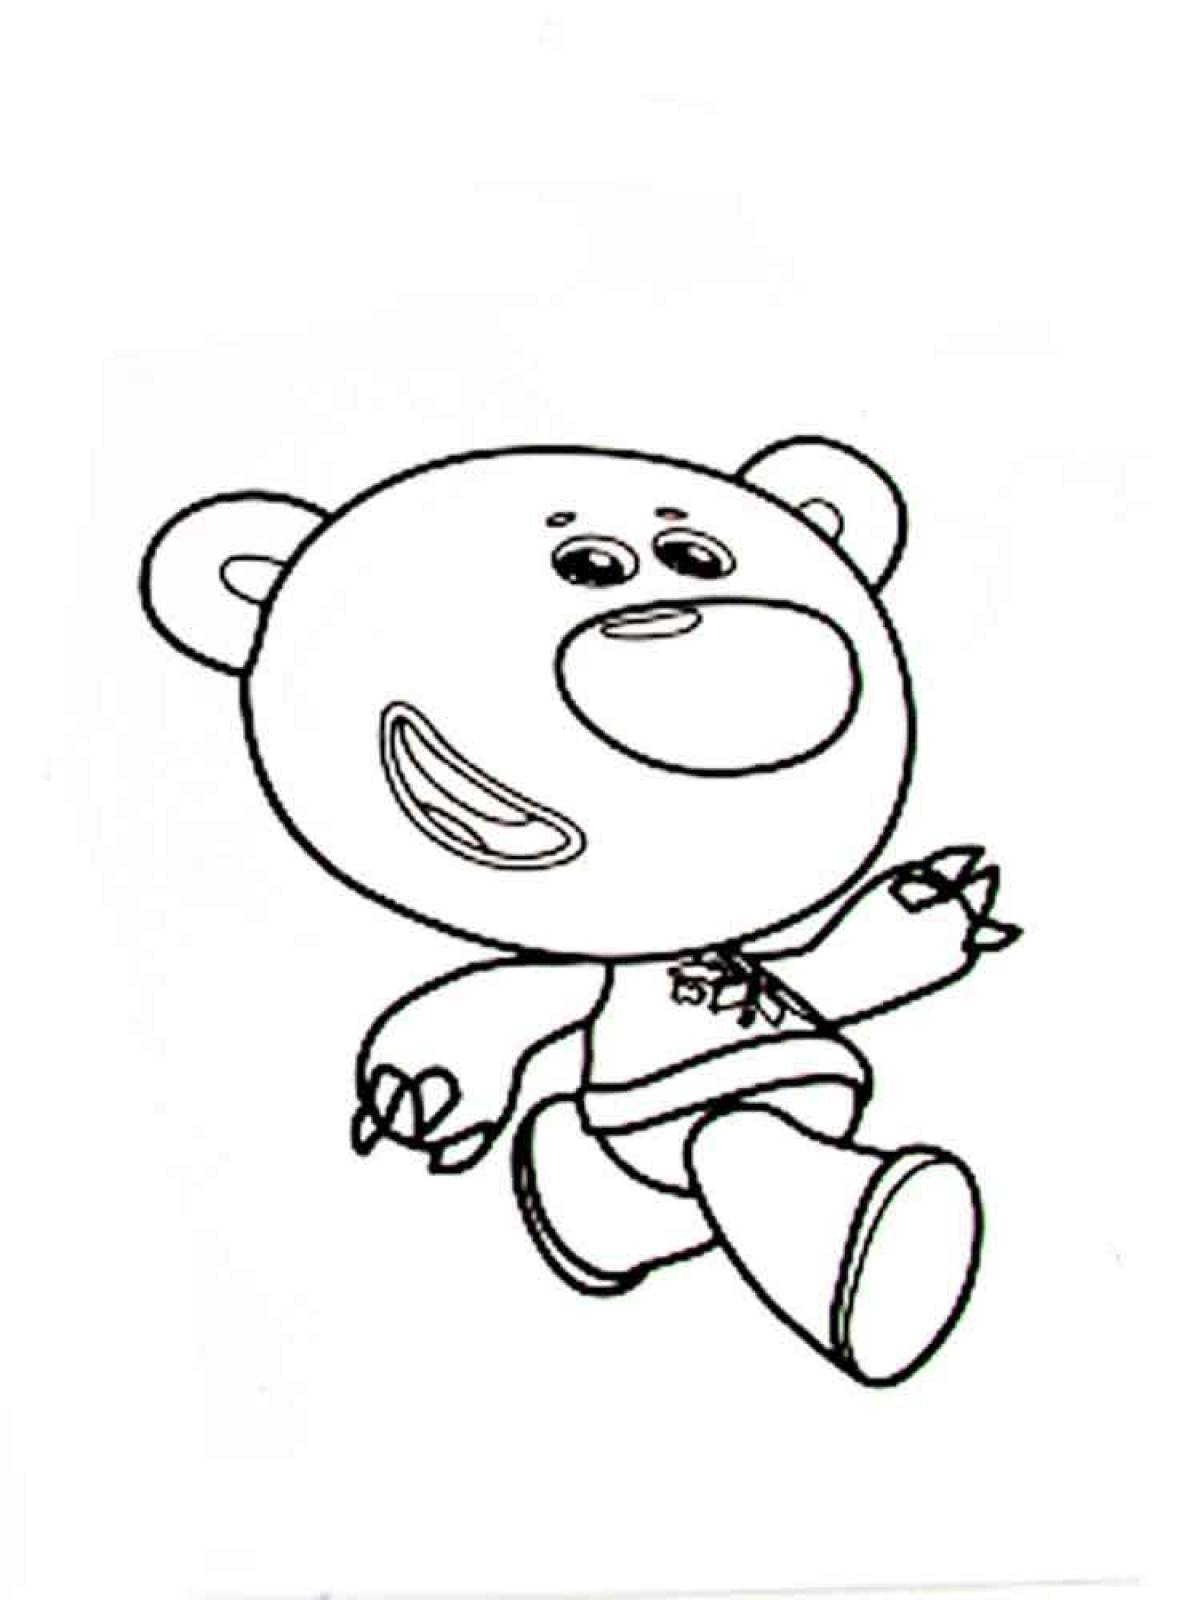 Chubby bears coloring pages